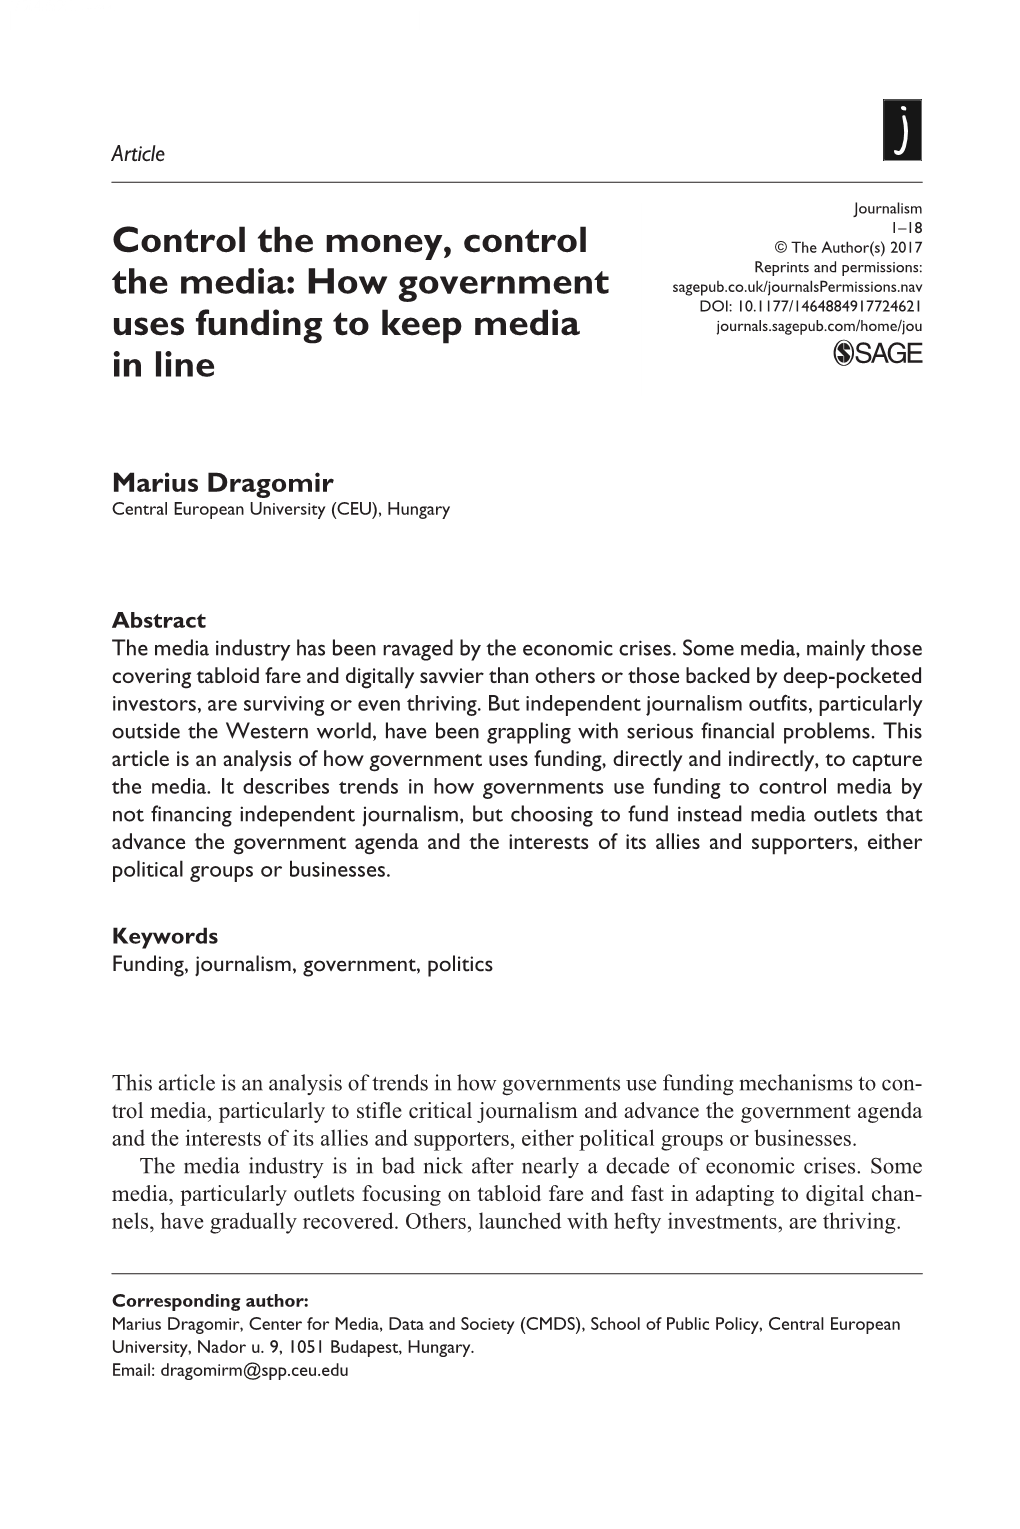 How Government Uses Funding to Keep Media in Line